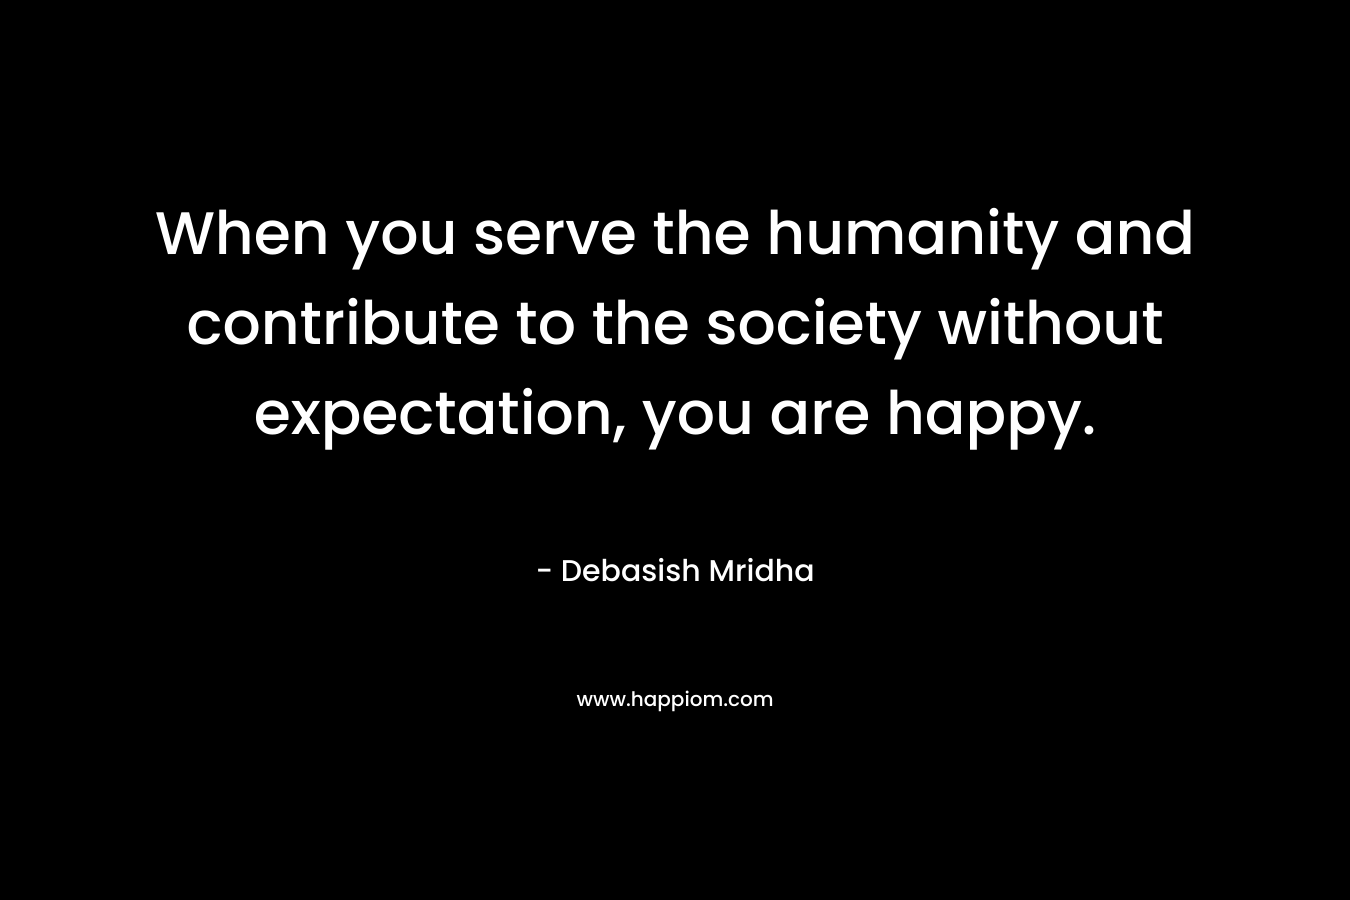 When you serve the humanity and contribute to the society without expectation, you are happy.